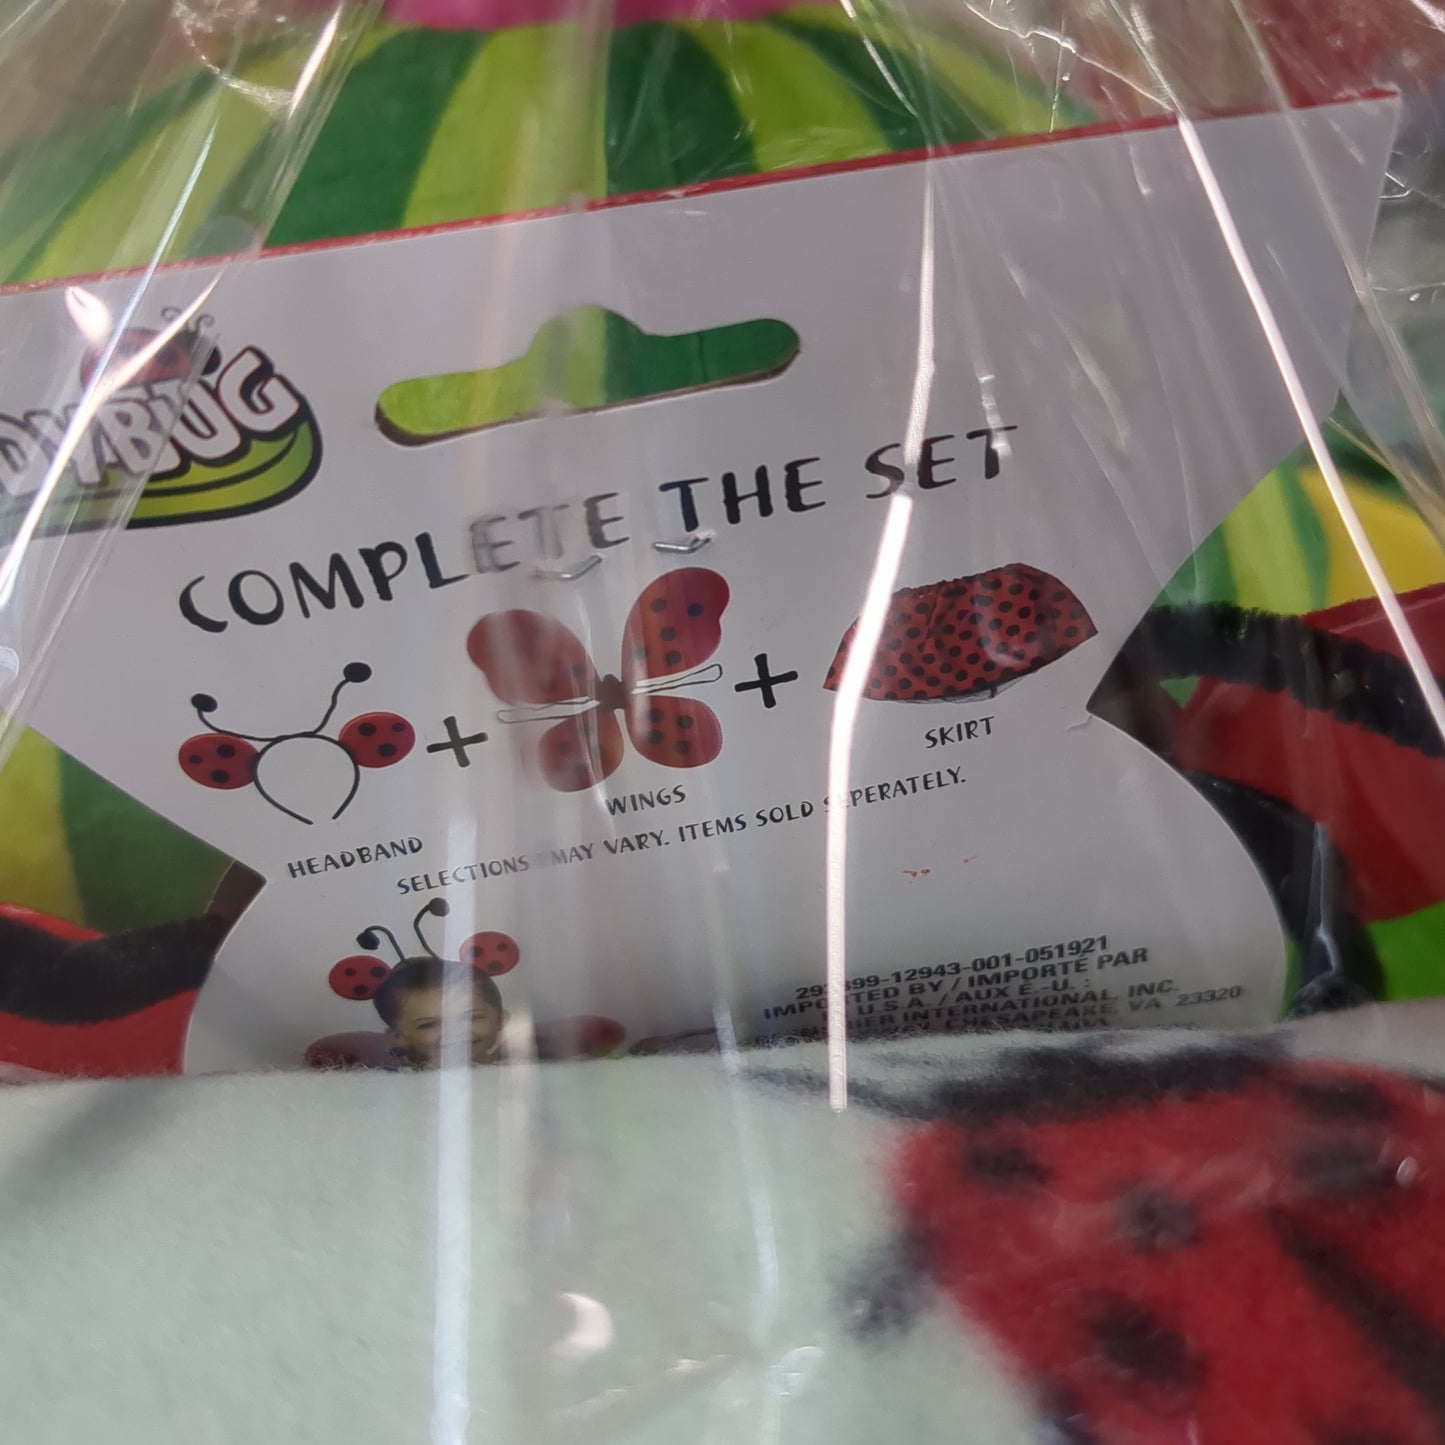 Gift Basket: Ladybug Stuffed Animal and Blanket (In-Store Pick-Up Only)